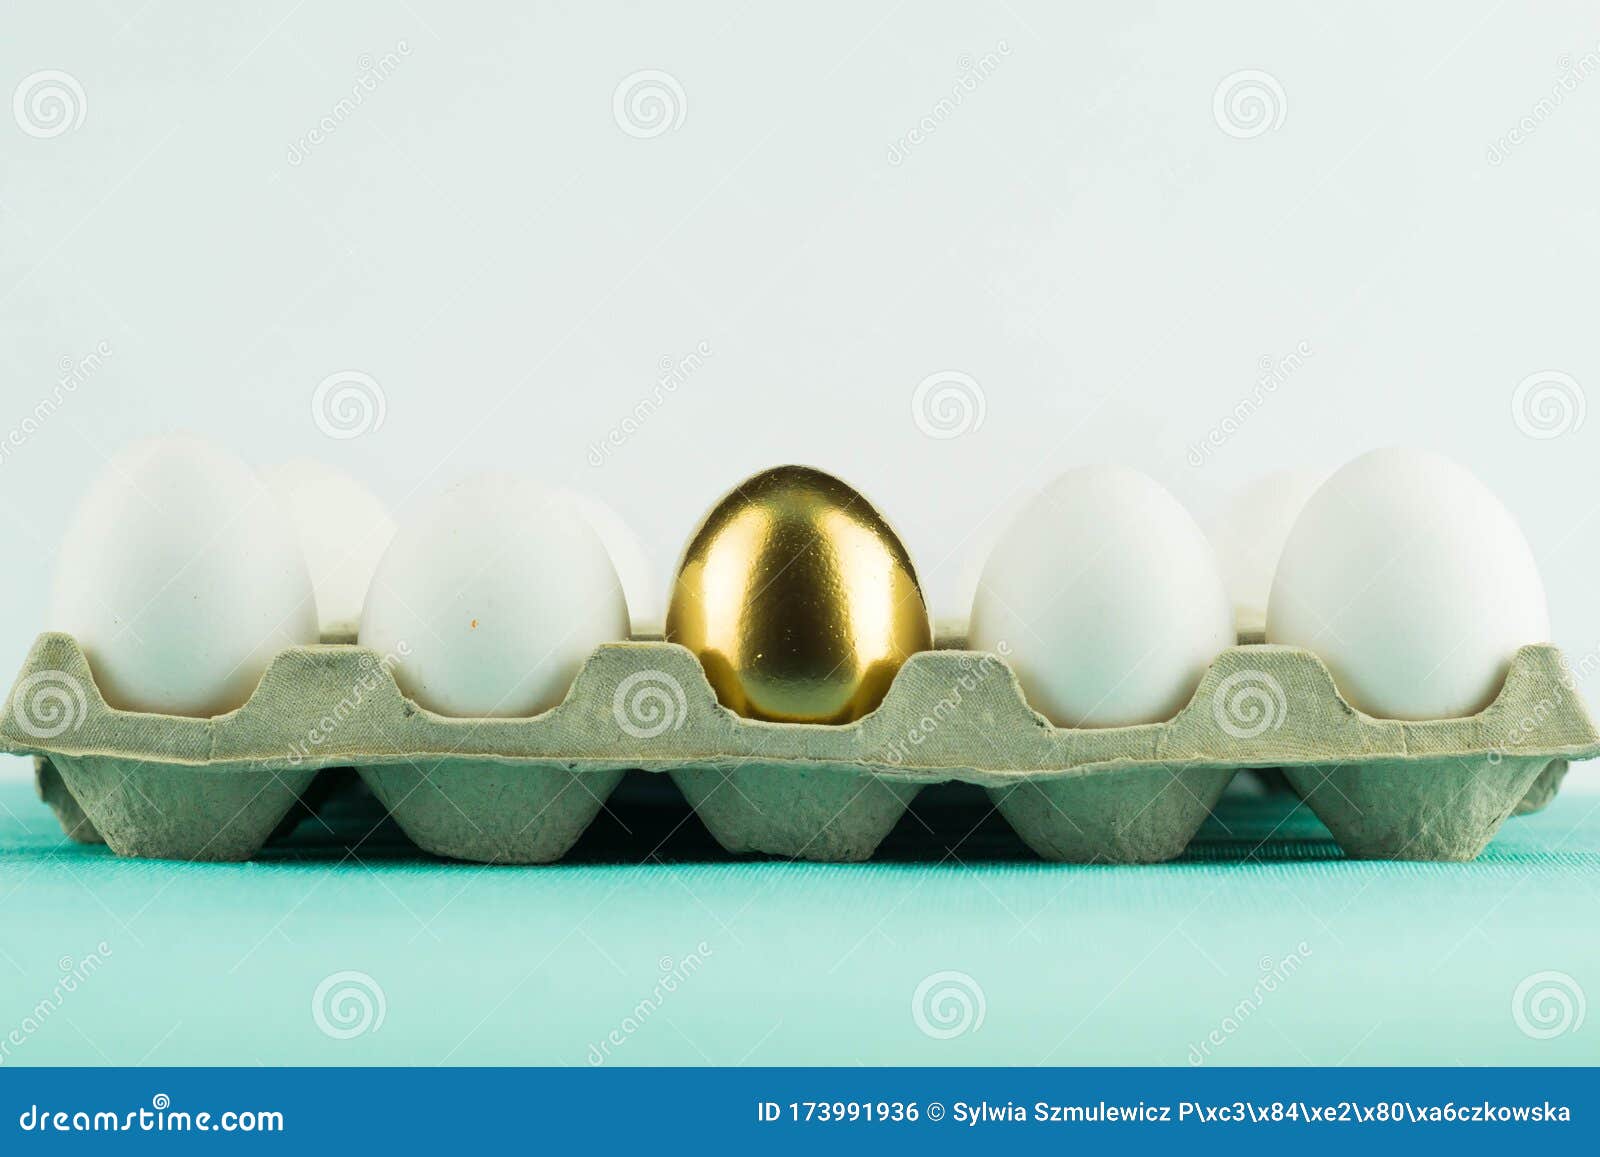 white eggs in a paper box and one unique golden egg inside them on white background. leadership, genius, uniqueness concept.